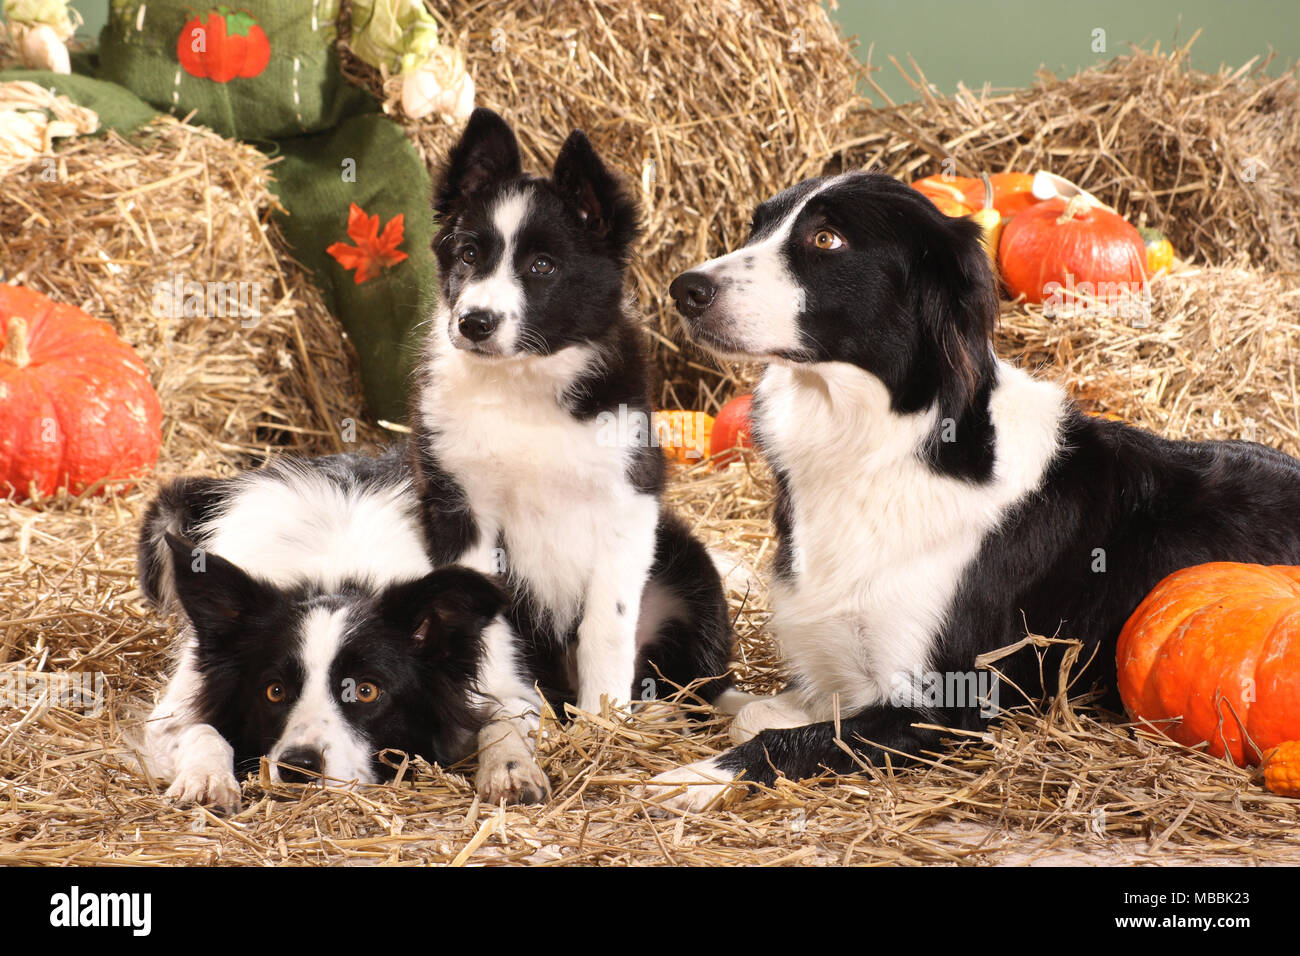 three border collies lying in straw with pumpkins Stock Photo